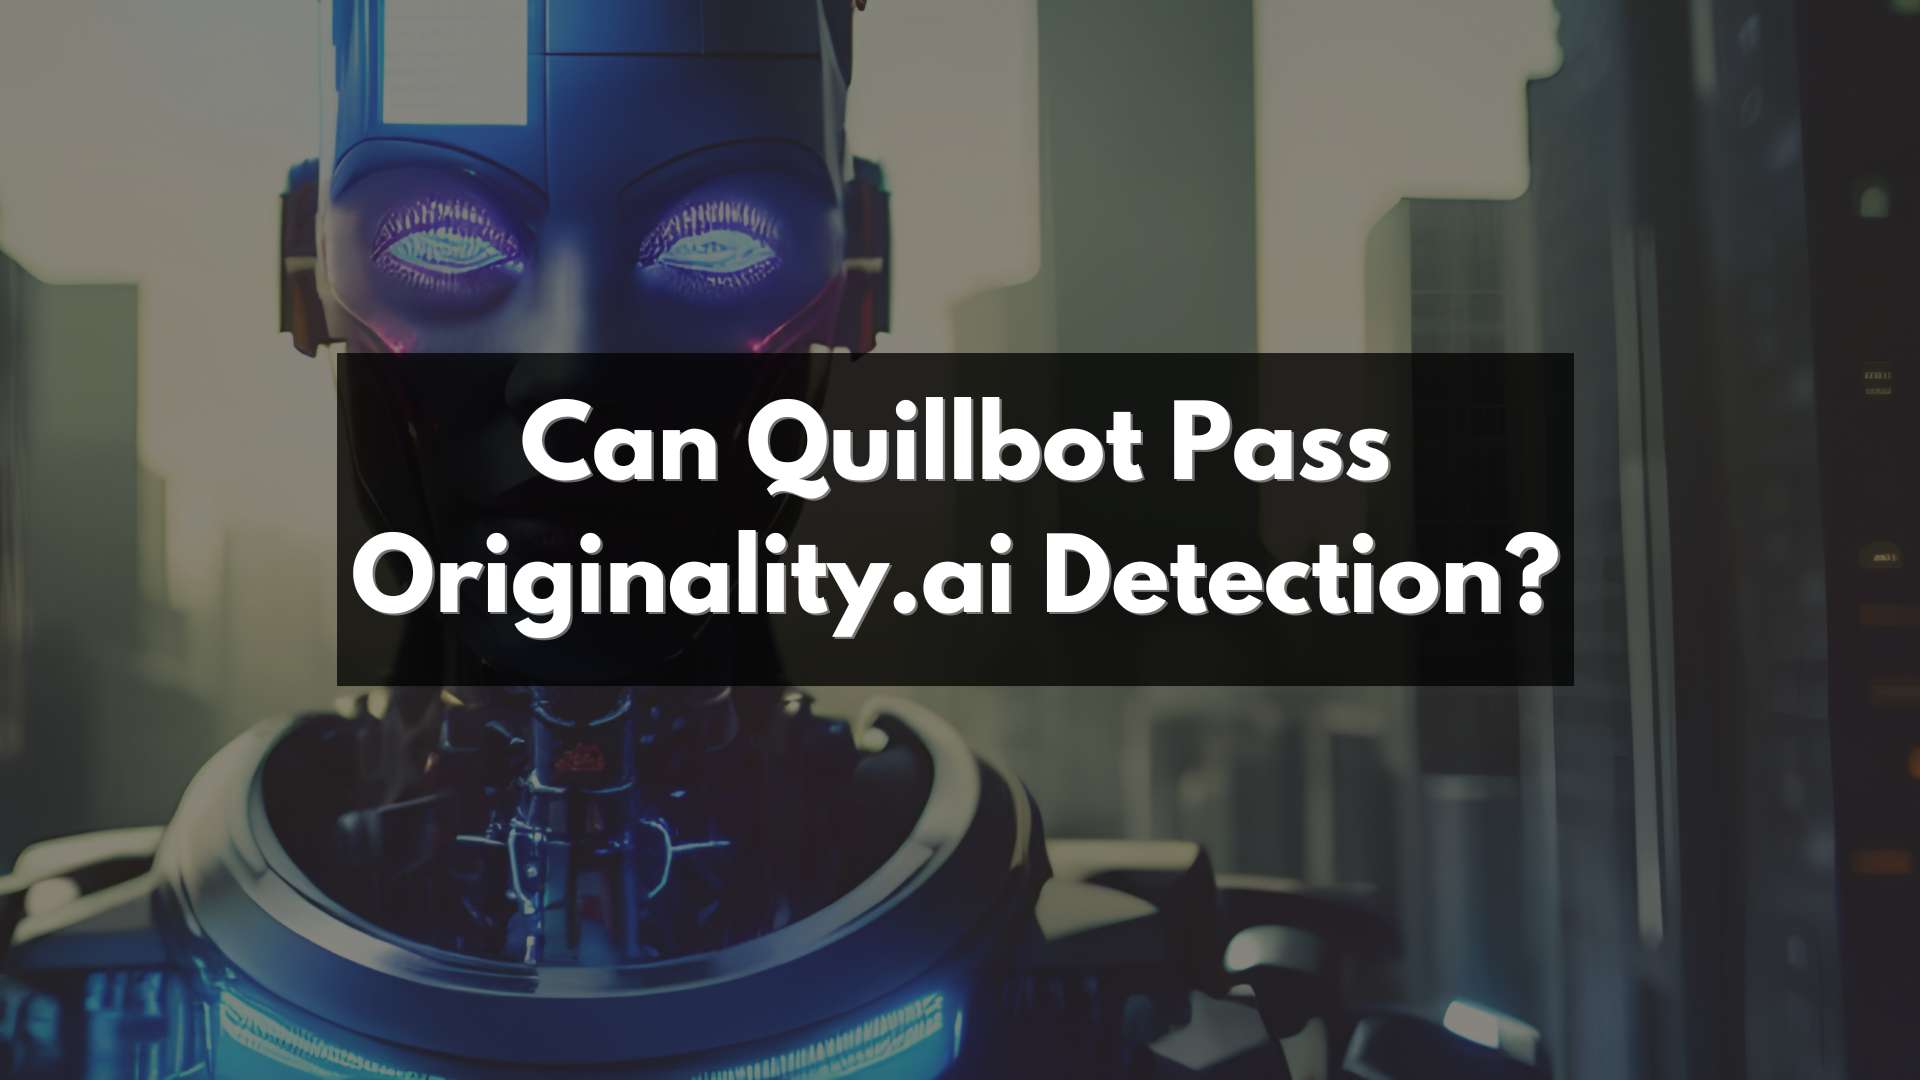 Can quillbot pass originality. Ai detection